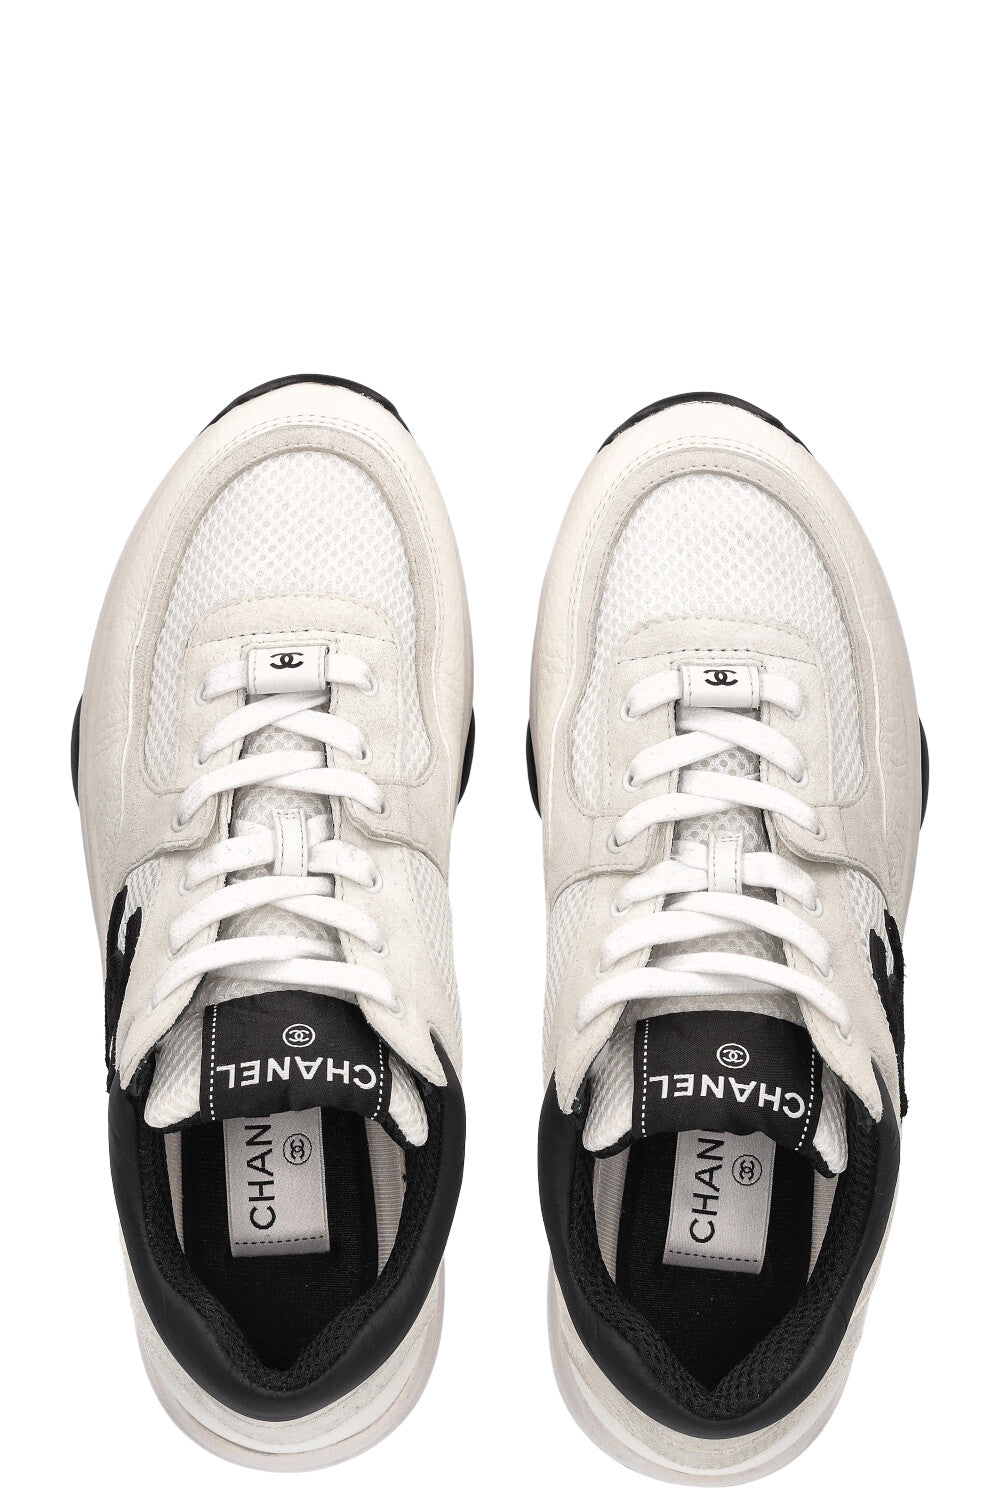 CHANEL Tennis Sneakers White